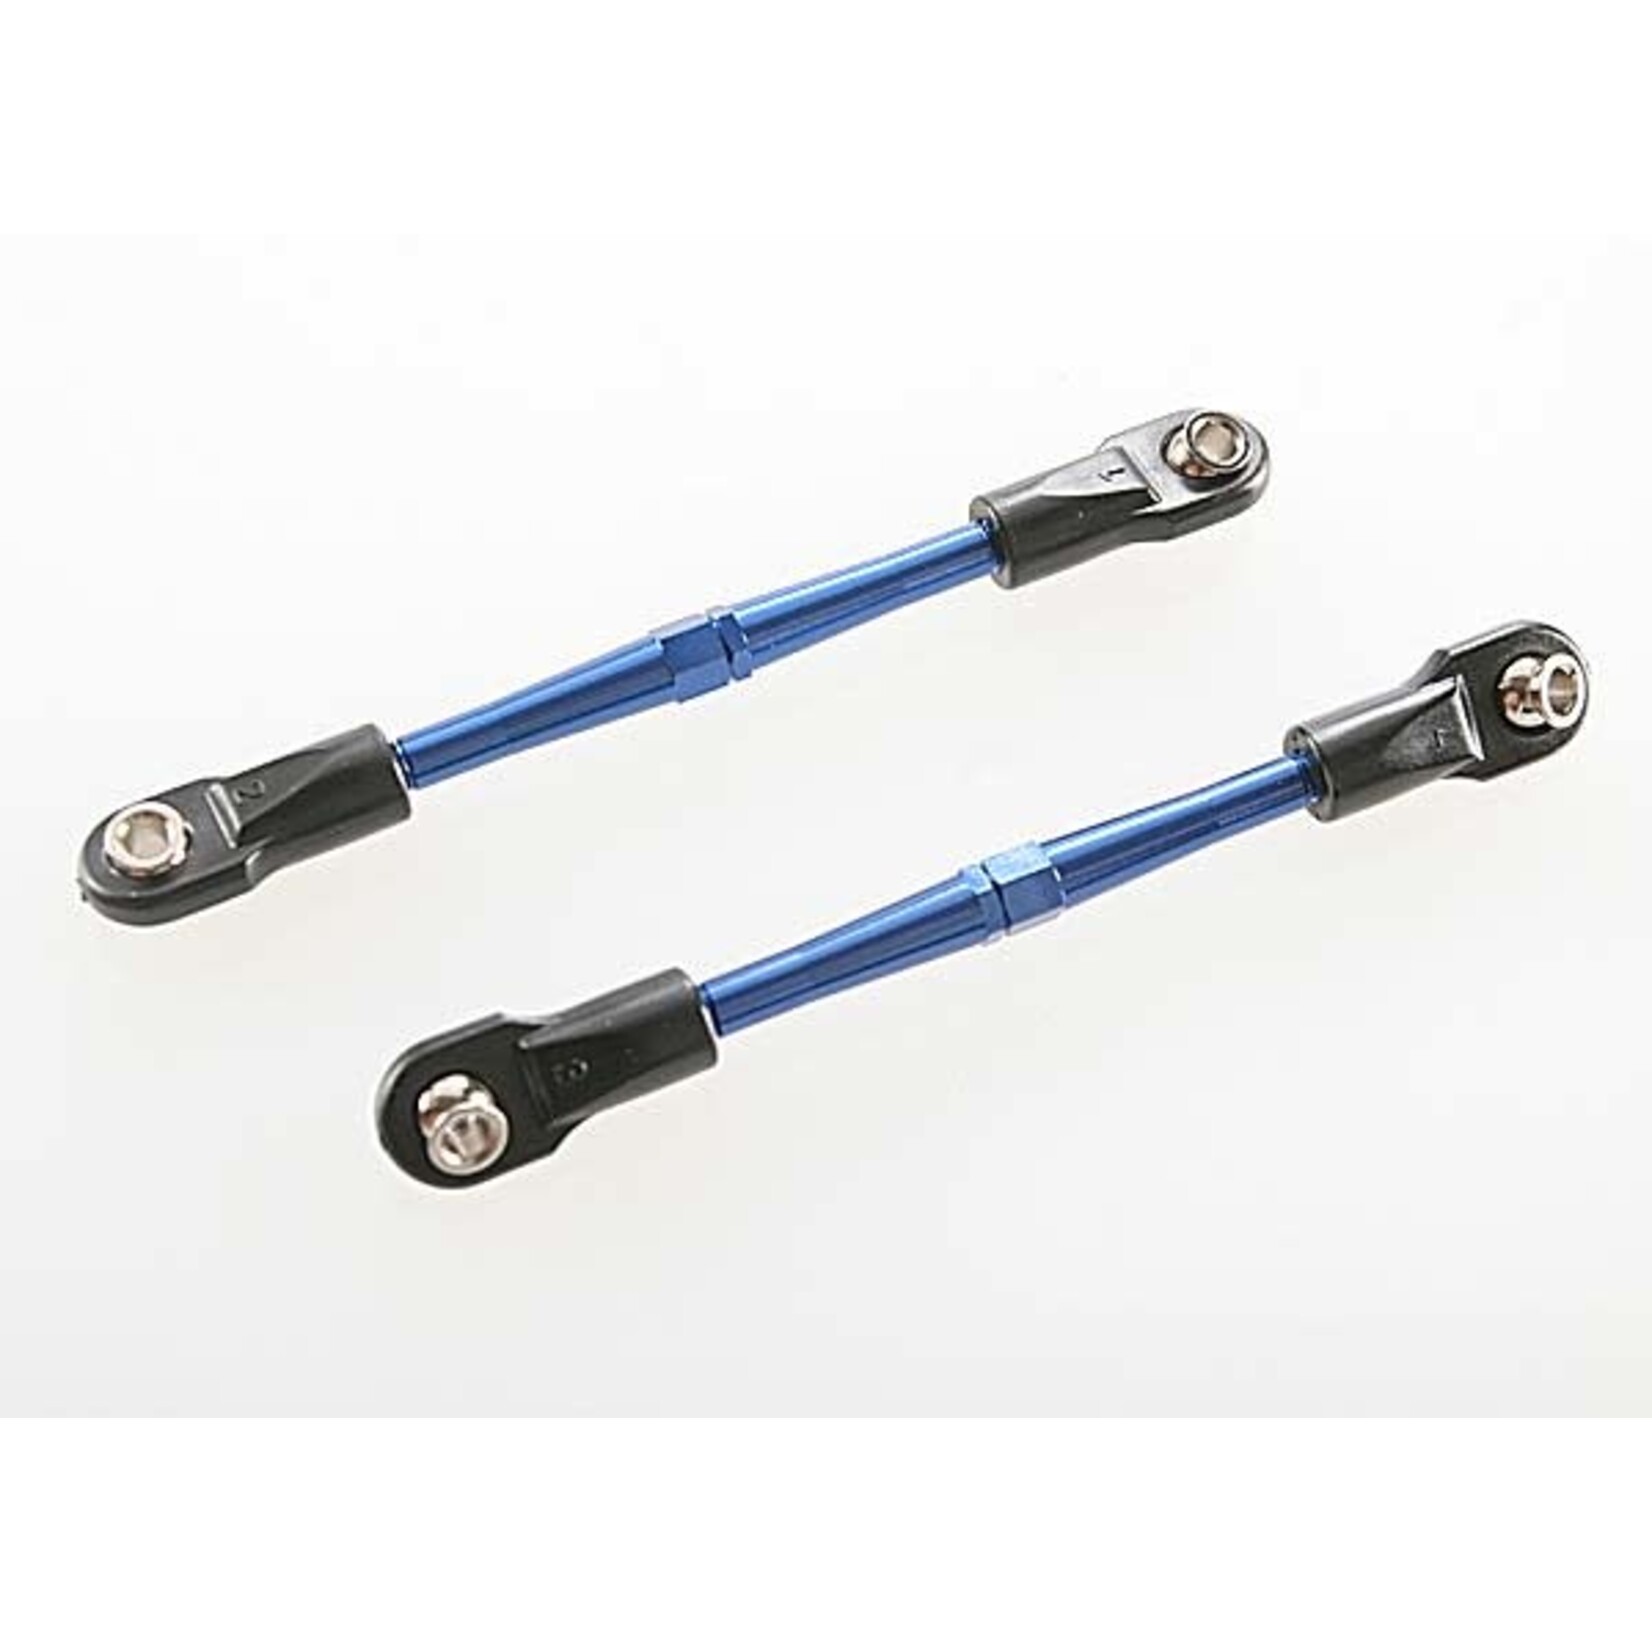 TRAXXAS Turnbuckles, aluminum (blue-anodized), toe links, 59mm (2) (assembled w/ rod ends & hollow balls) (requires 5mm aluminum wrench #5477)